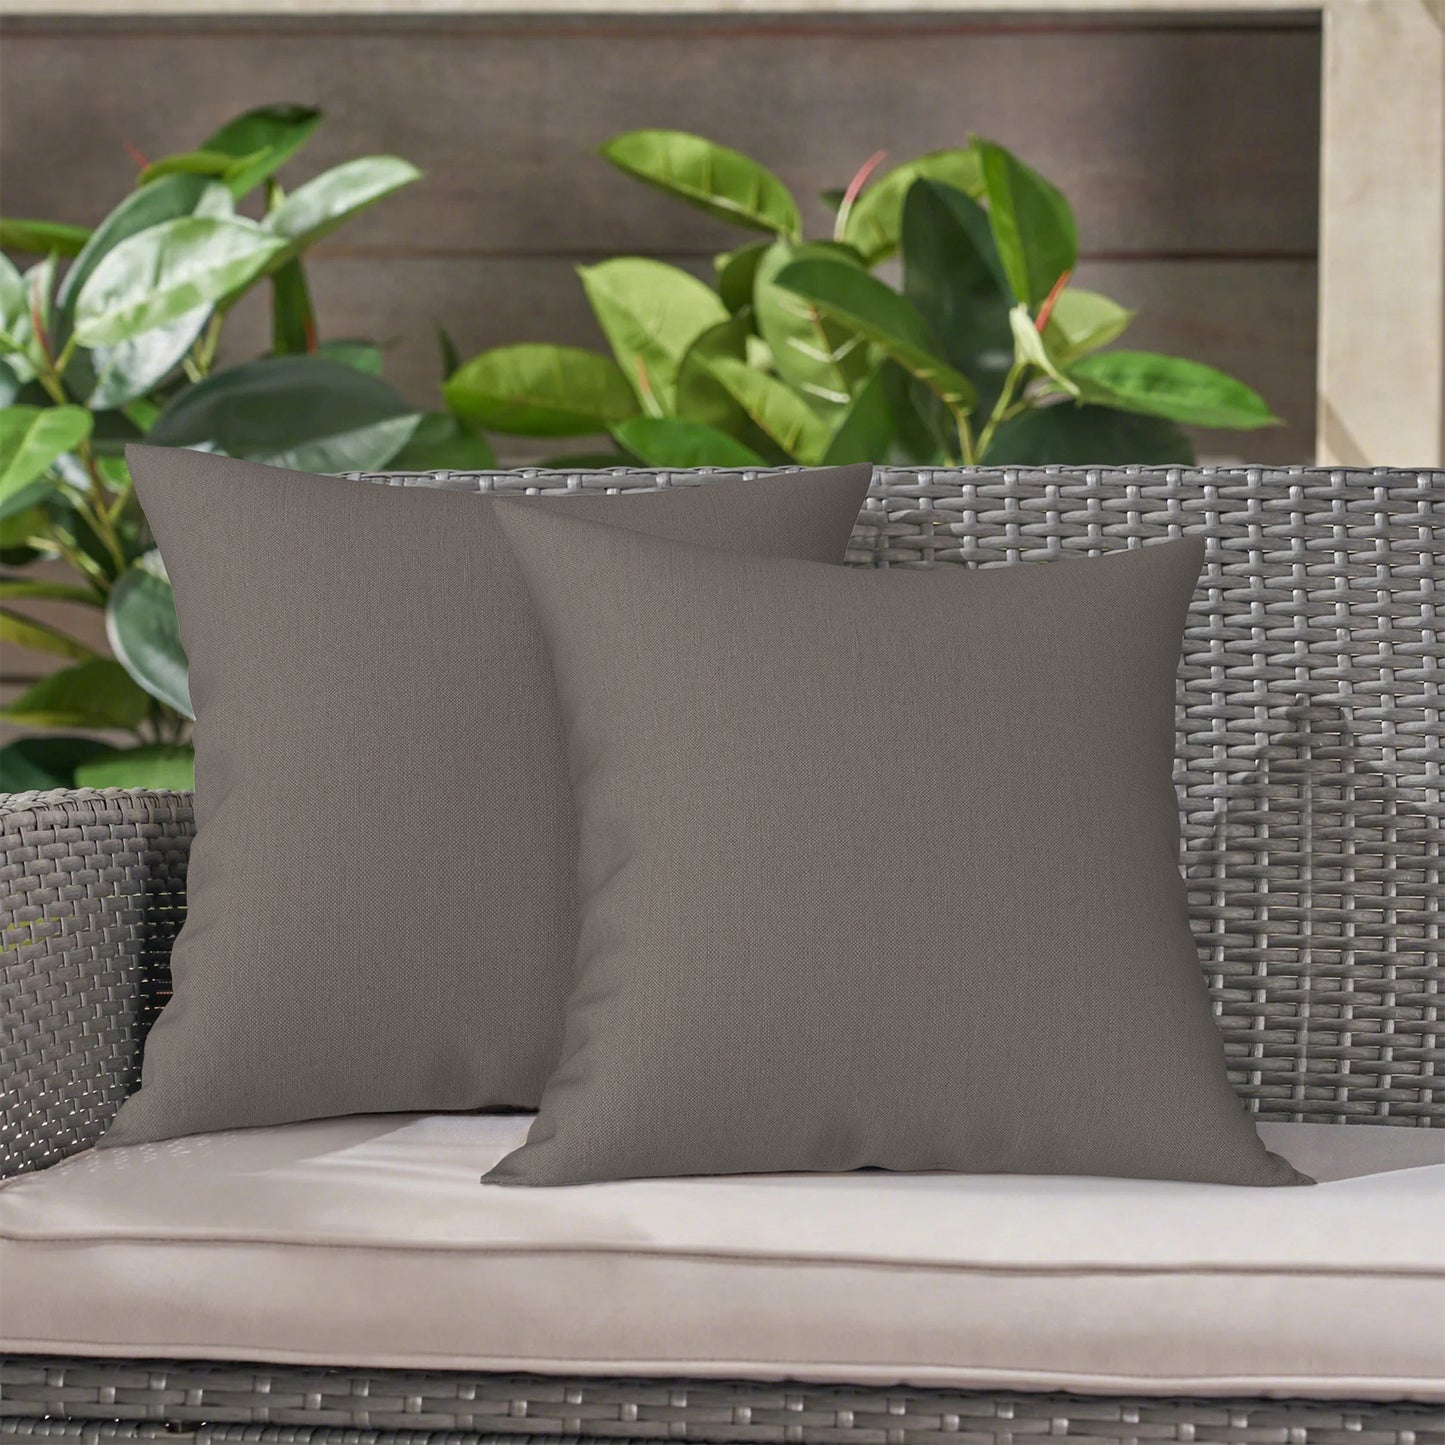 Melody Elephant Outdoor Throw Pillow Covers Pack of 2, Decorative Water Repellent Square Pillow Cases 18x18 Inch, Patio Pillowcases for Home Patio Furniture Use, Dark Grey